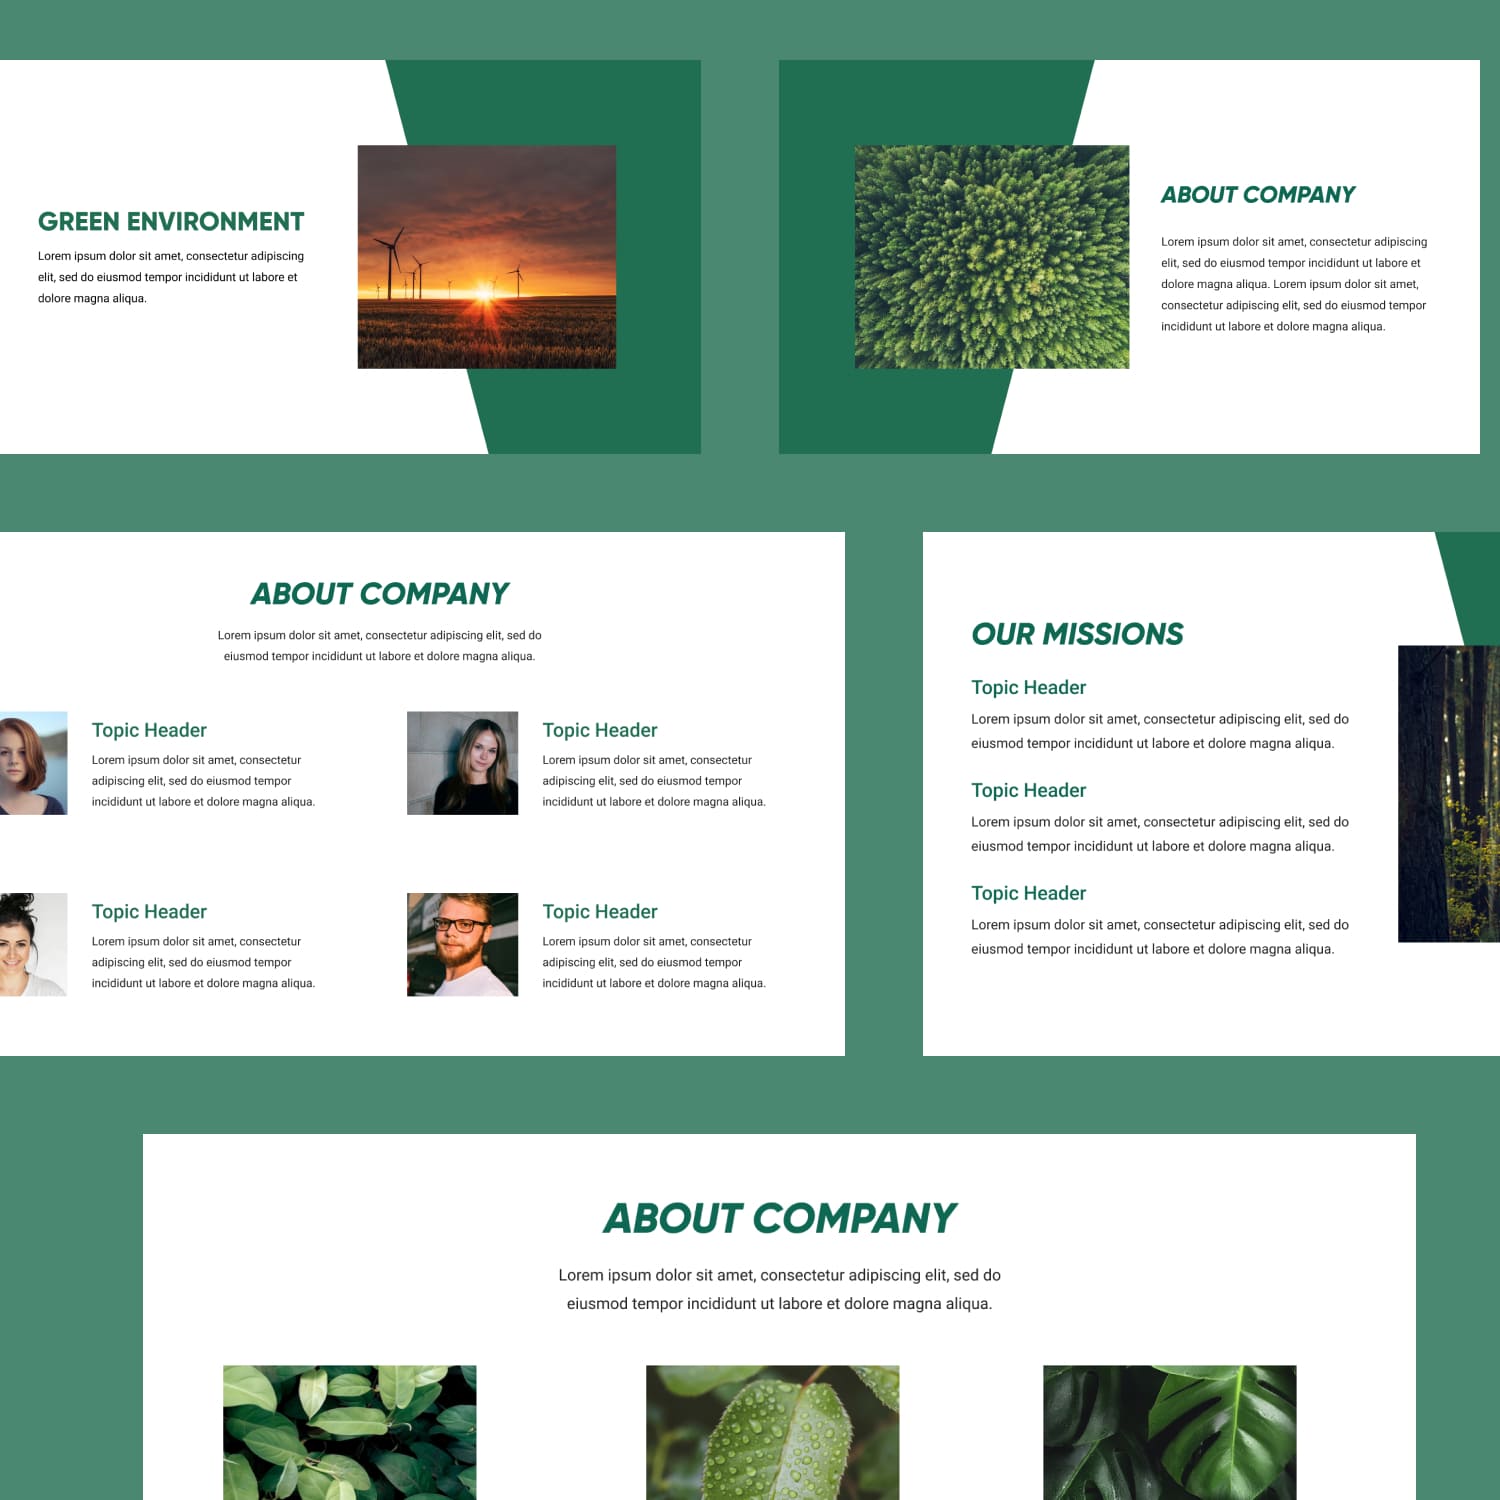 Free Powerpoint Green Environment Background cover image.